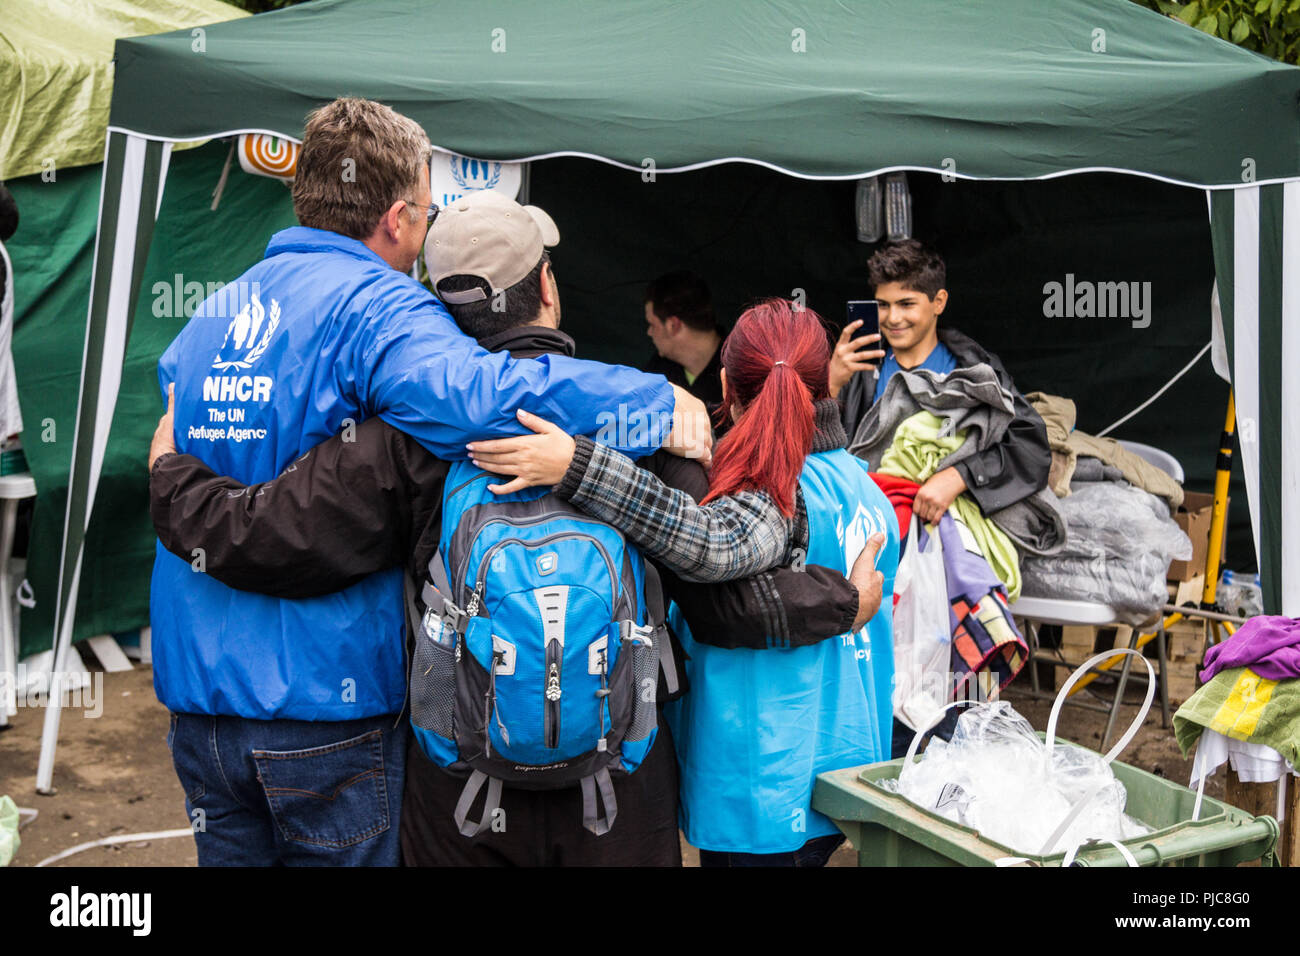 BERKASOVO, SERBIA - SEPTEMBER 27, 2015: Workers of the UNHCR, the United Nations Agency for refugees, taking pictures with a migrant at the border bet Stock Photo